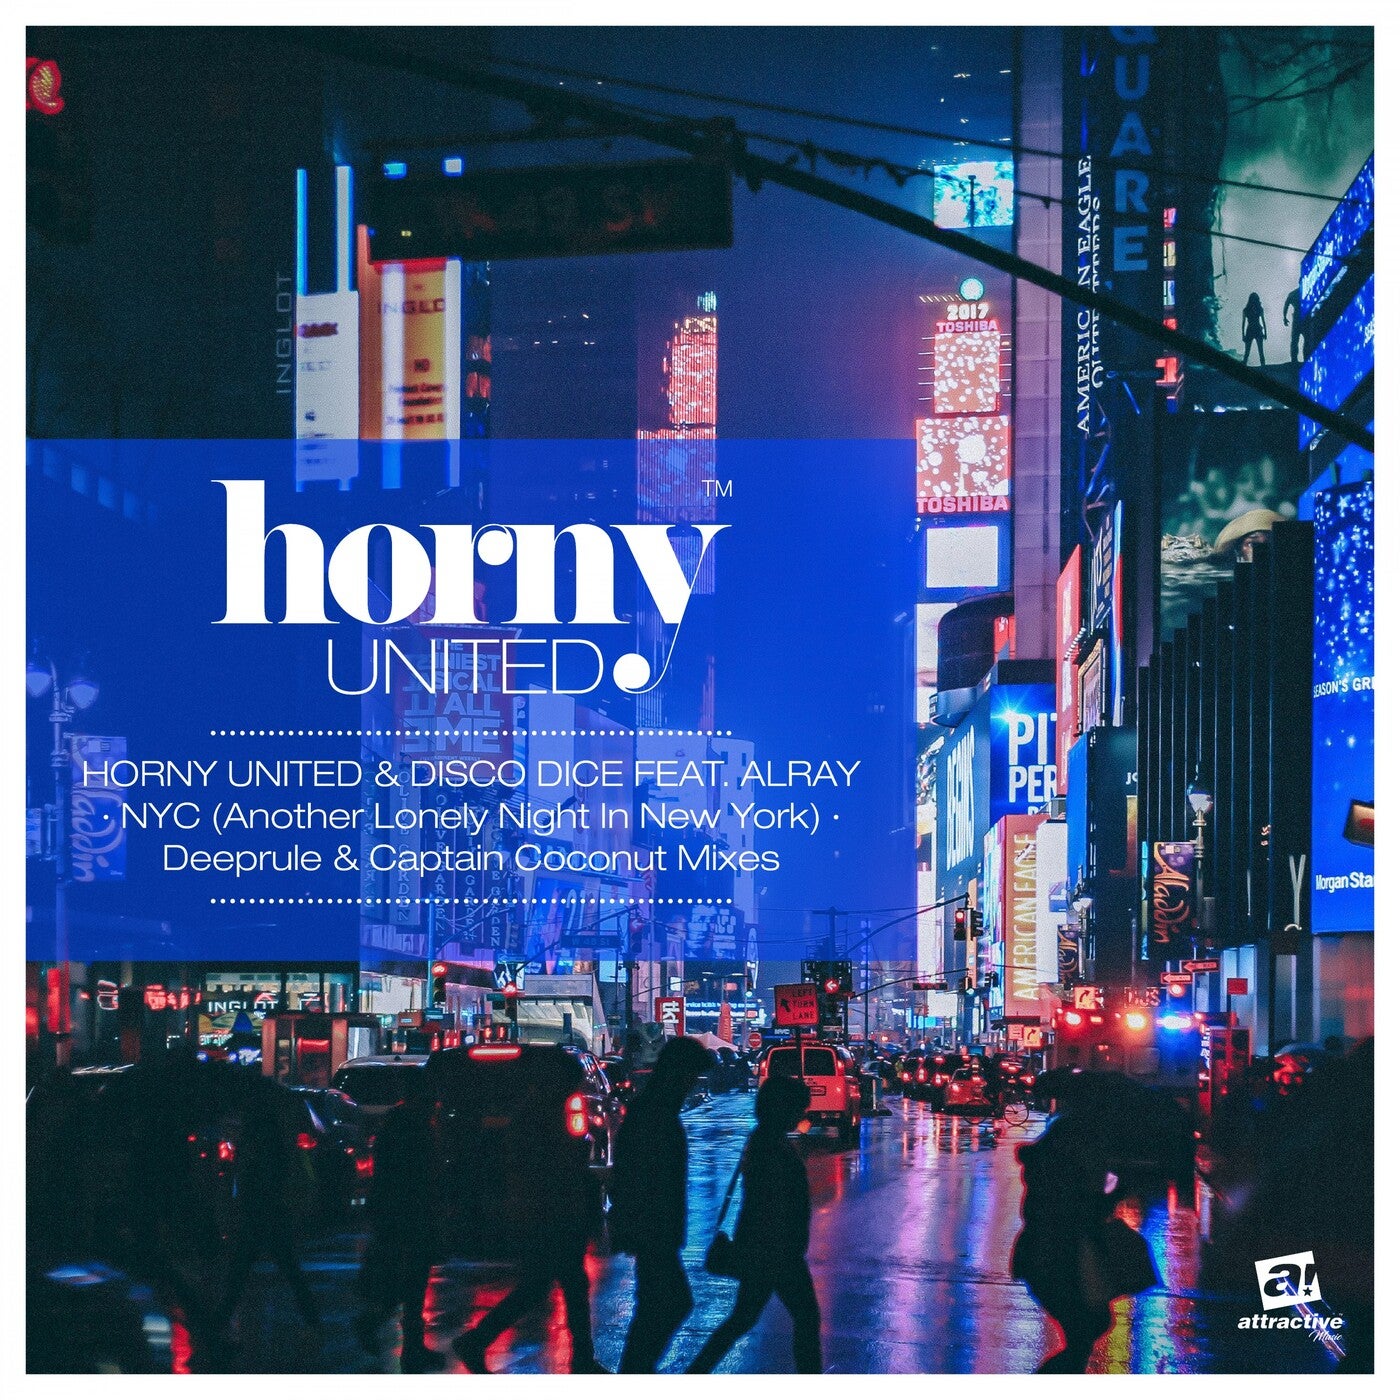 NYC (Another Lonely Night in New York) feat. Alray (Deeprule & Captain  Coconut Club Mix) by Horny United, Disco Dice, Alray on Beatport